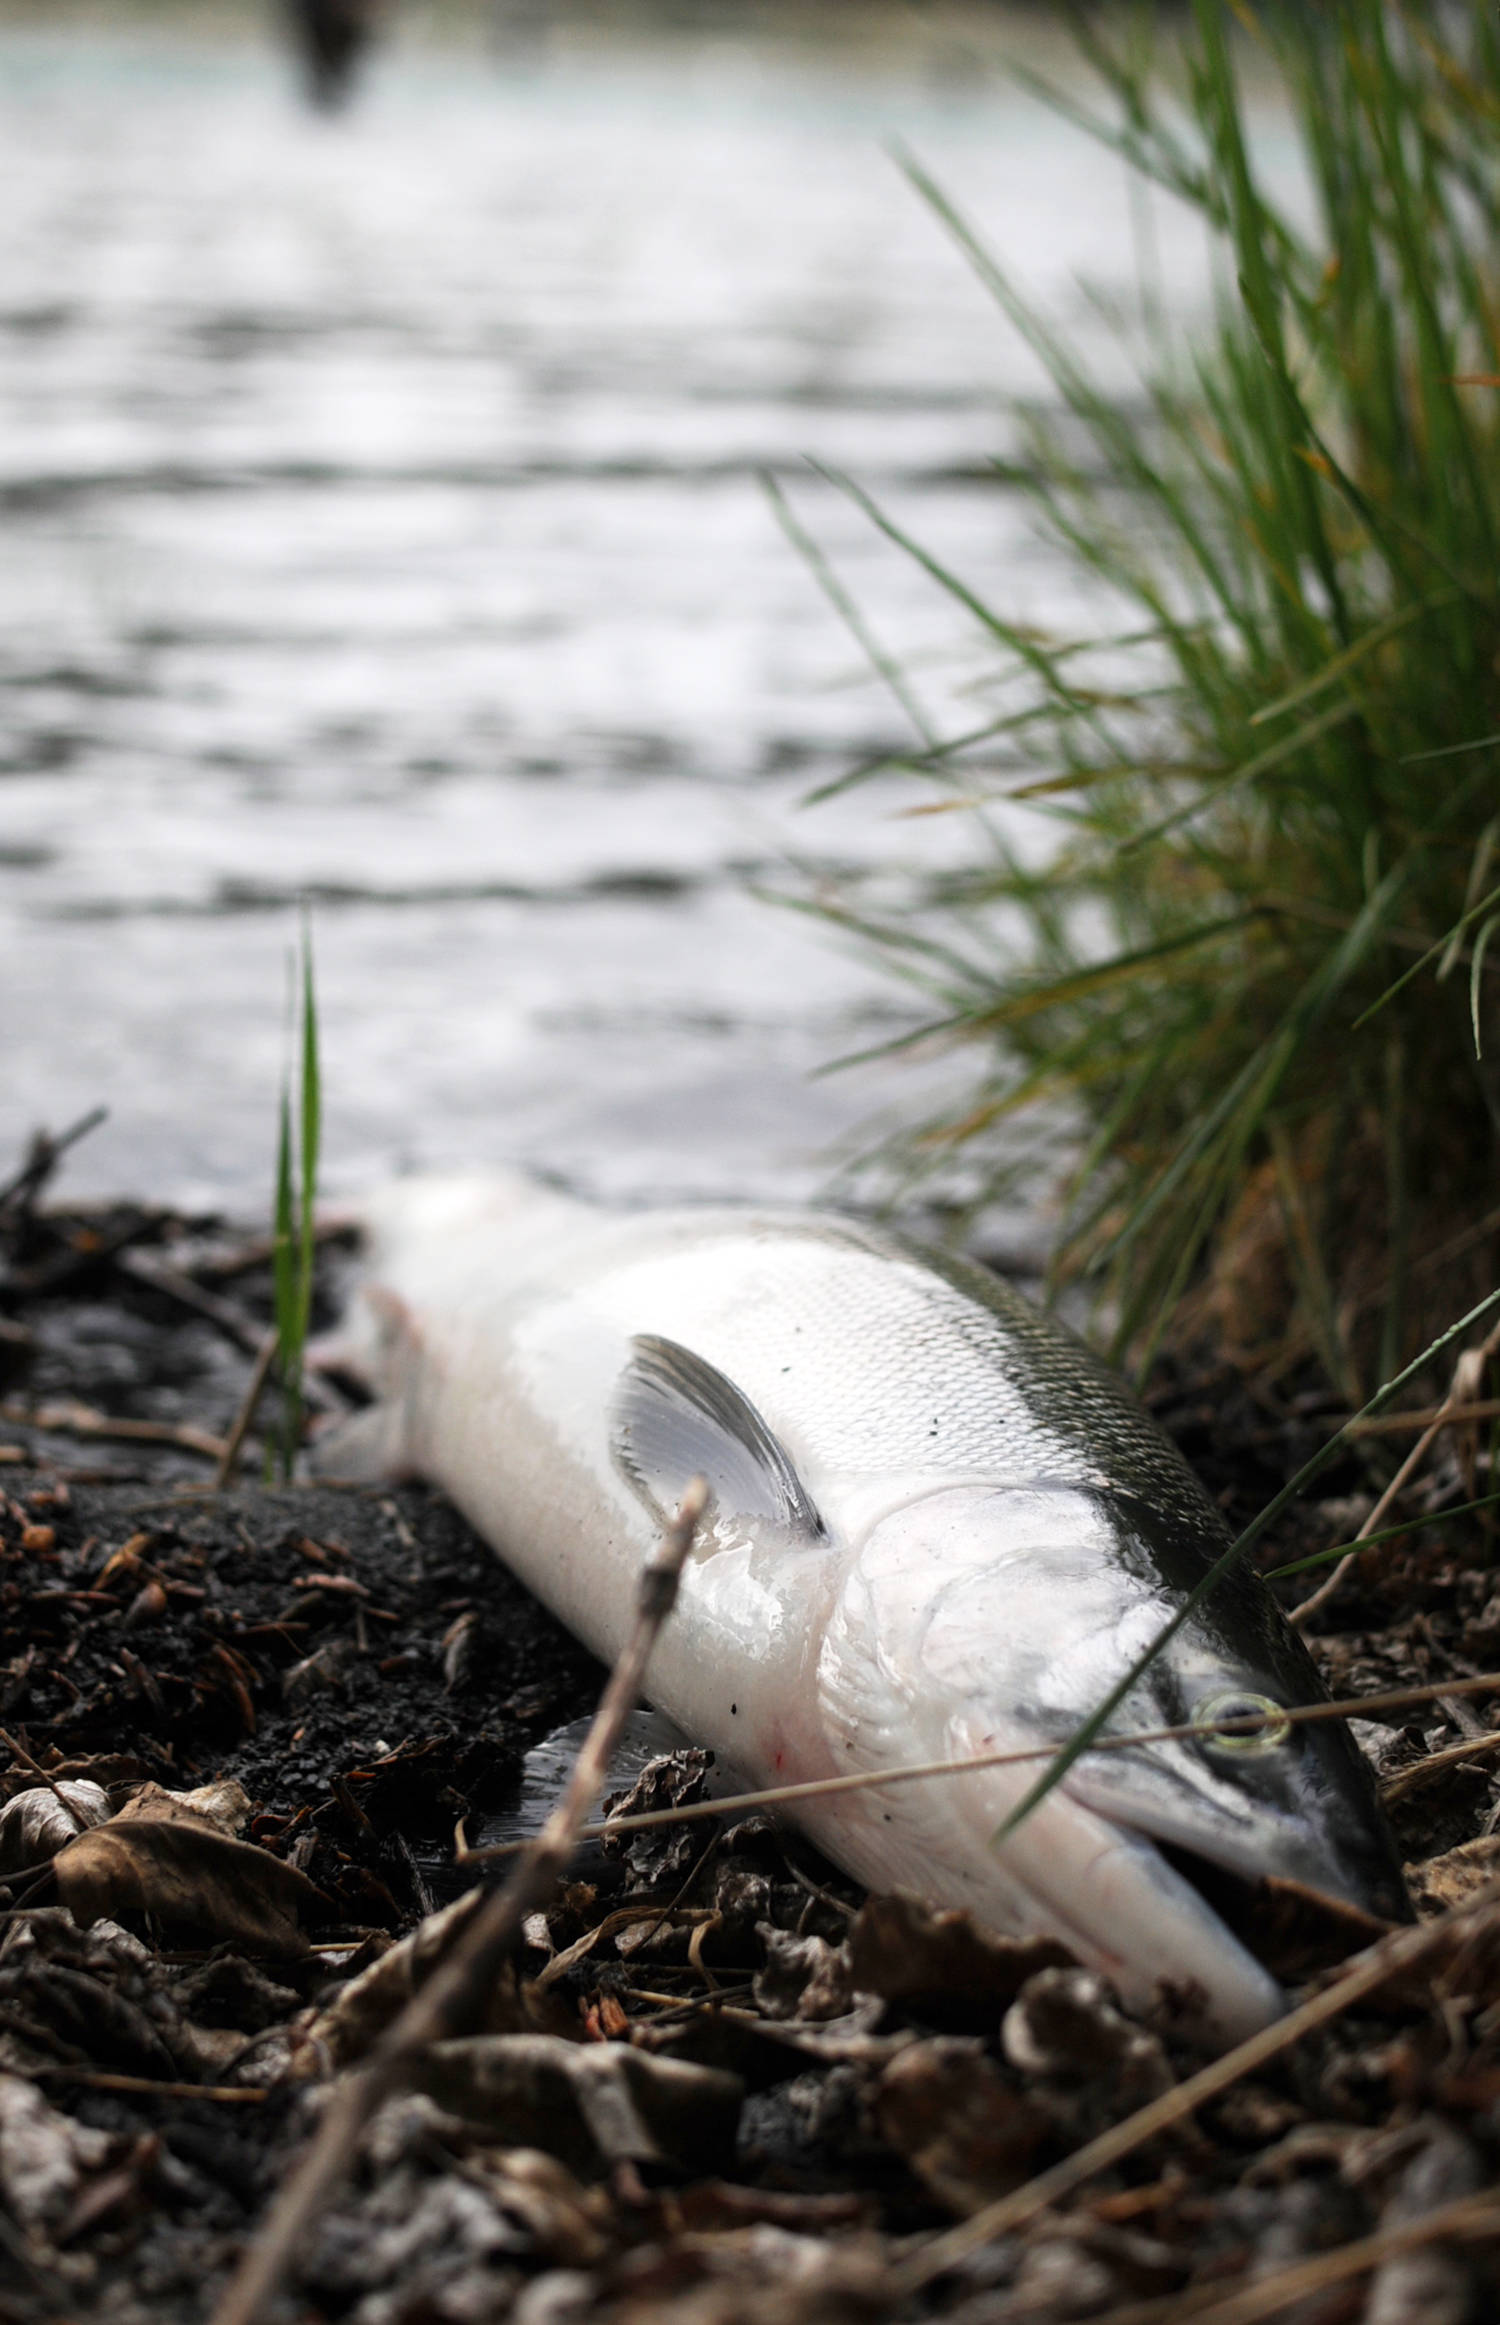 In this Sunday, June 11, 2017 photo, a sockeye salmon hooked by a lucky angler rests on the bank of the Kenai River downstream of the confluence with the Russian River near Cooper Landing, Alaska. (Elizabeth Earl/Peninsula Clarion)